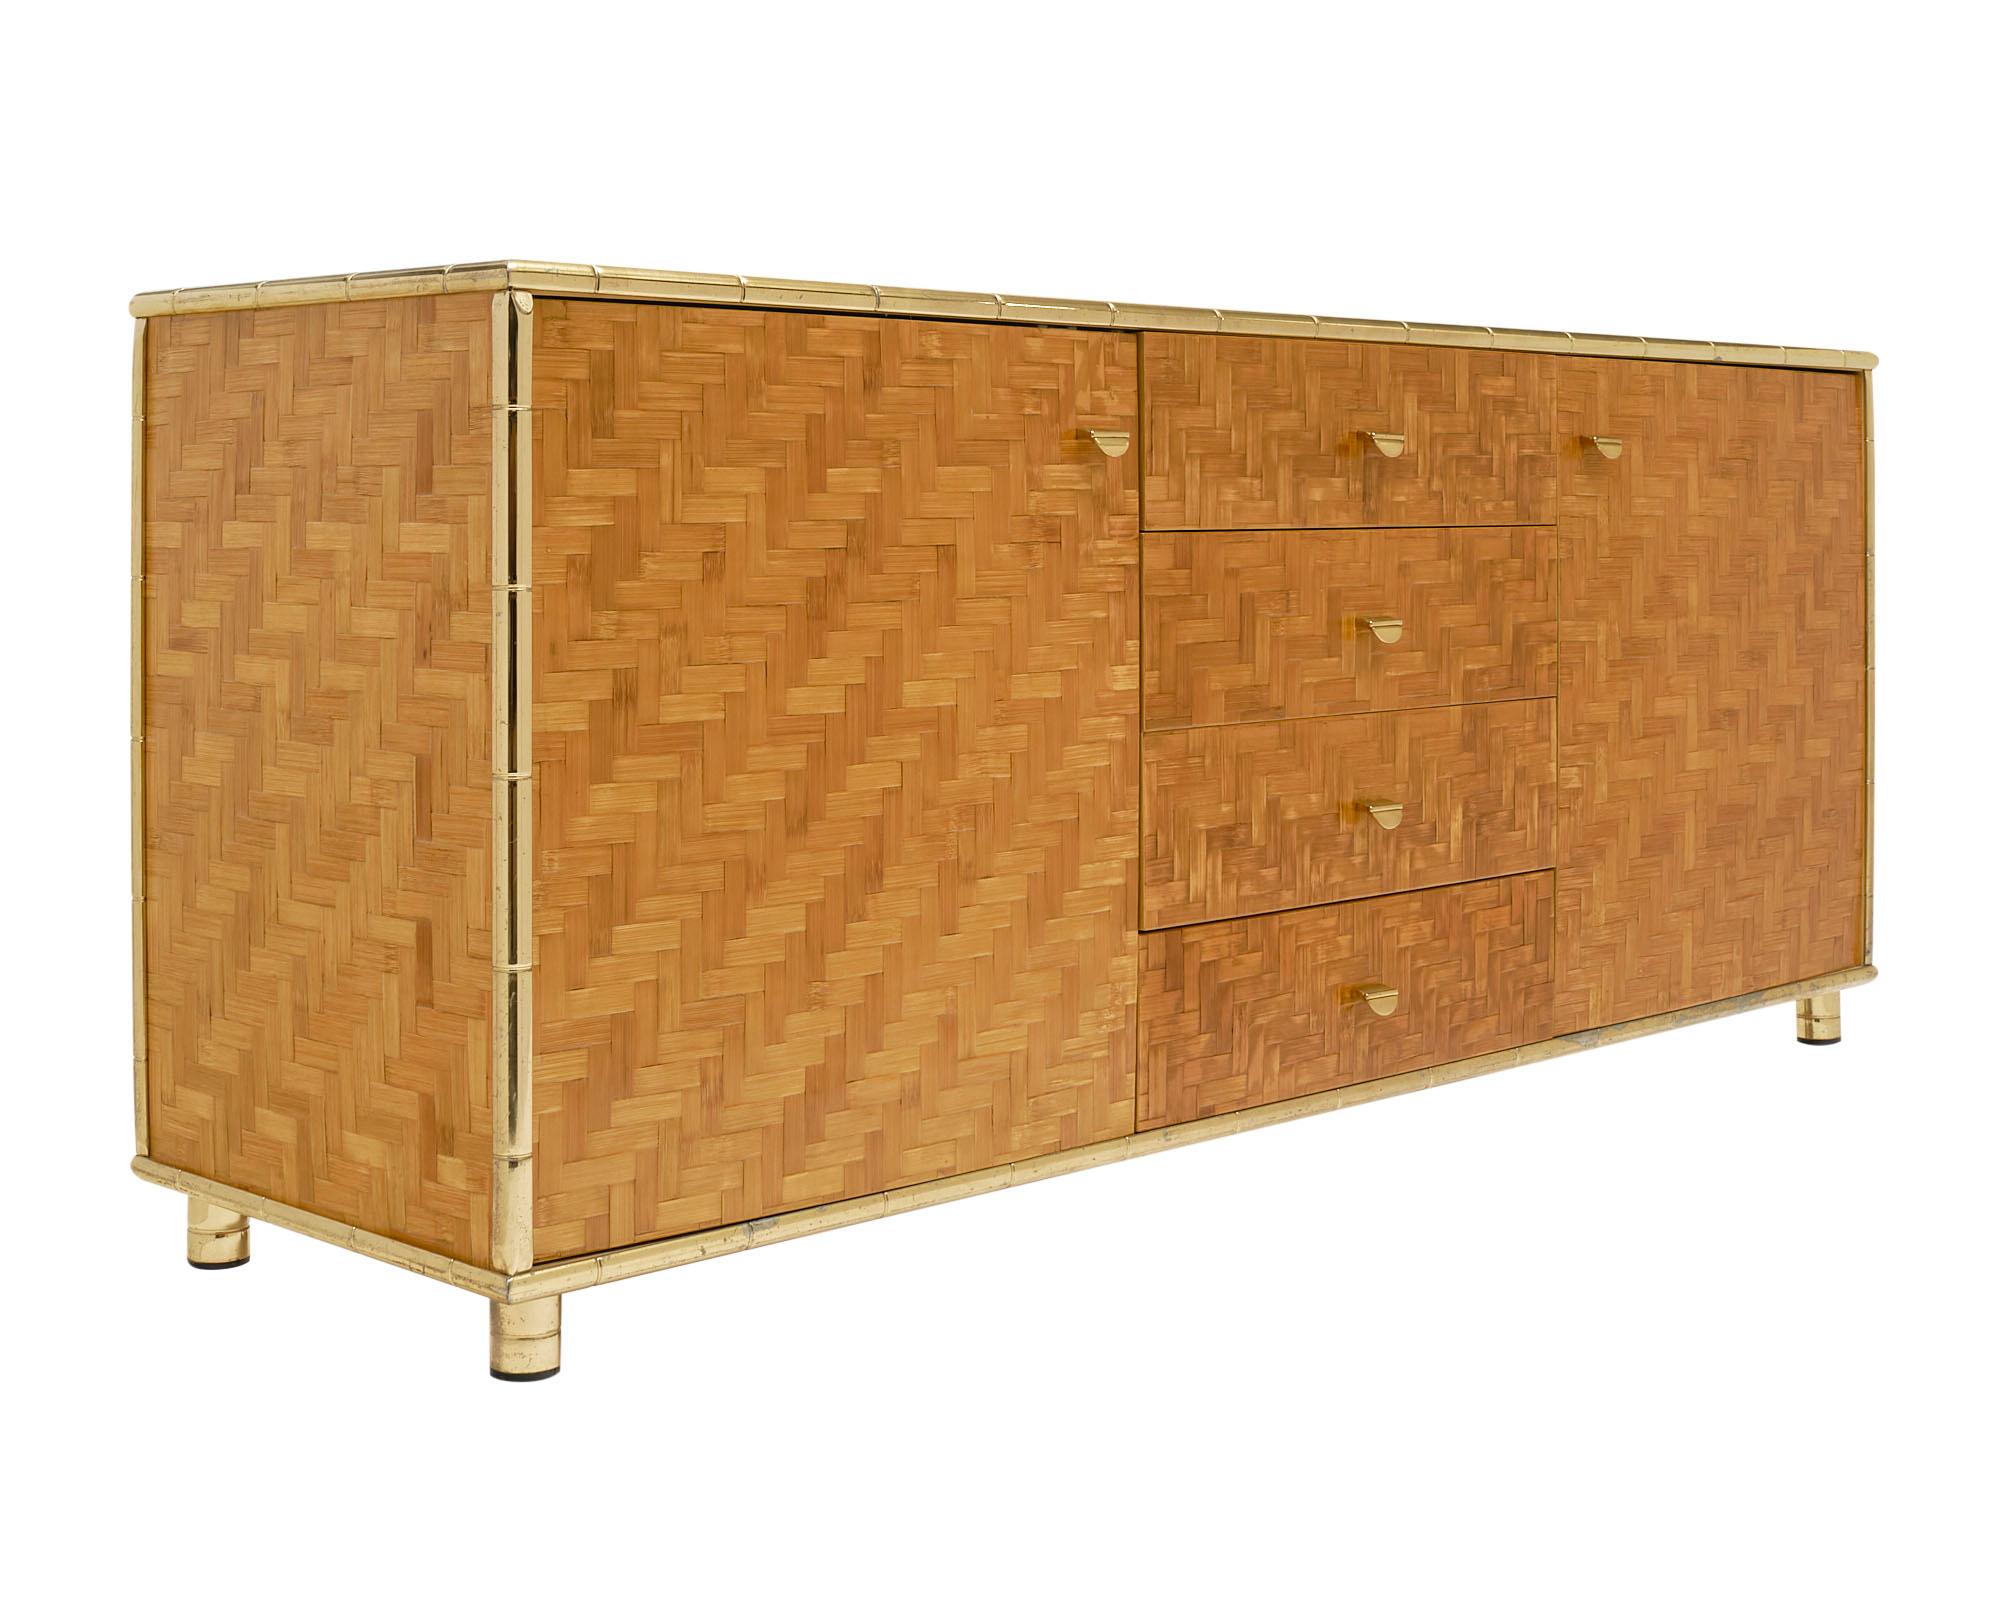 Italian Mid Century Modern buffet with 2 doors and 4 drawers. The gilt brass frame, which emulates bamboo, showcases the body of the cabinet that is covered in a bamboo veneer.